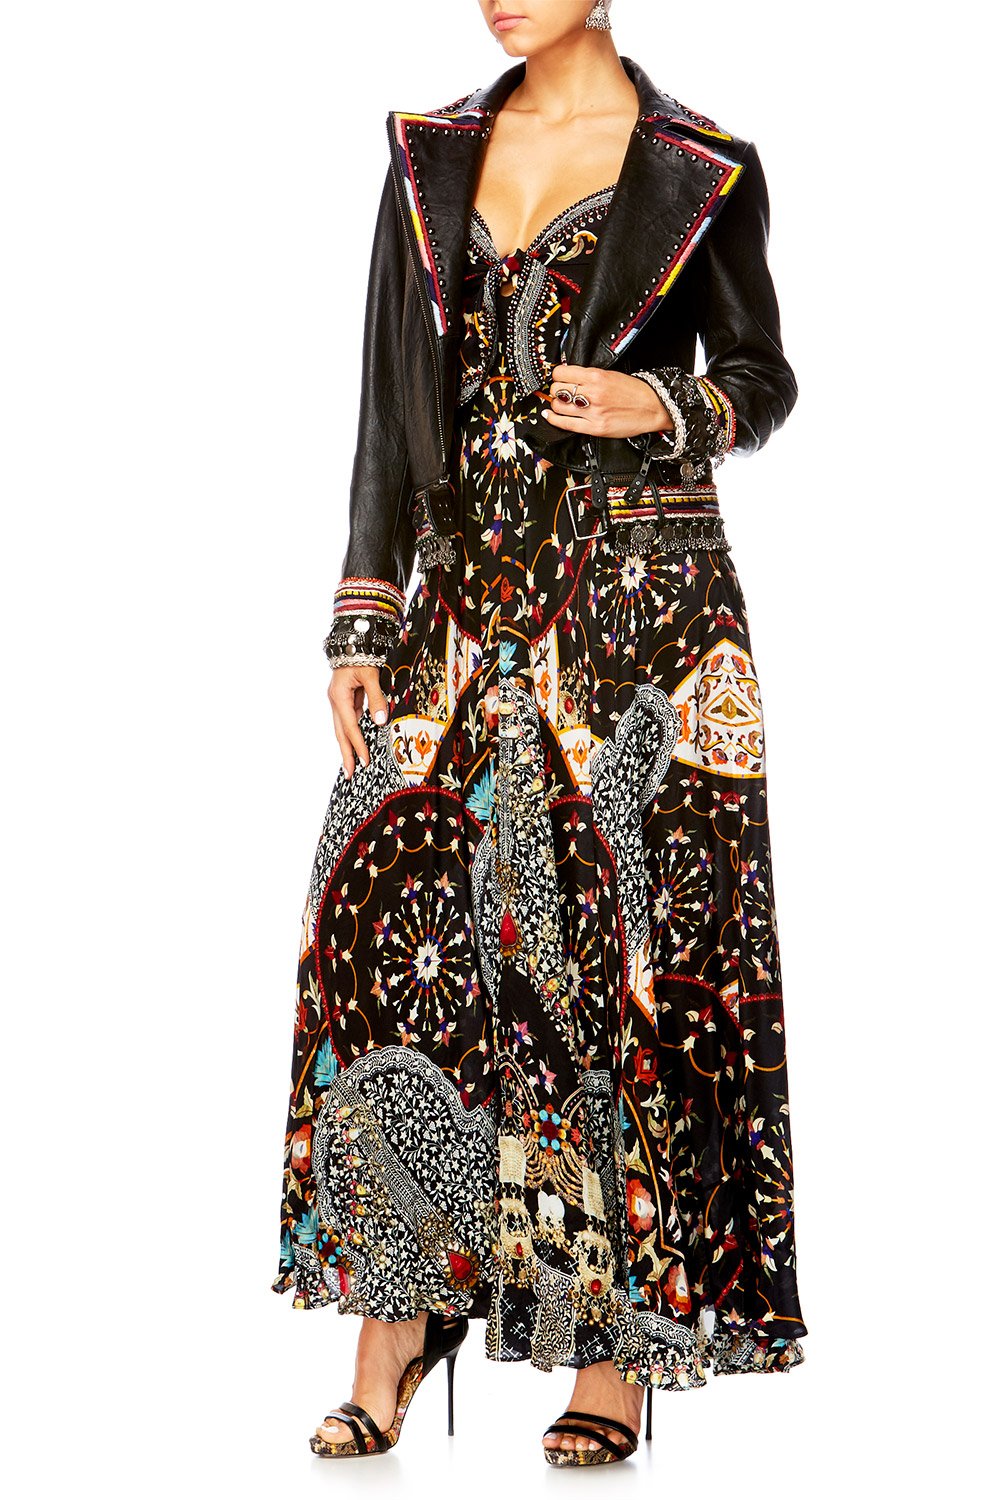 CHAMBER OF REFLECTIONS LONG DRESS W TIE FRONT